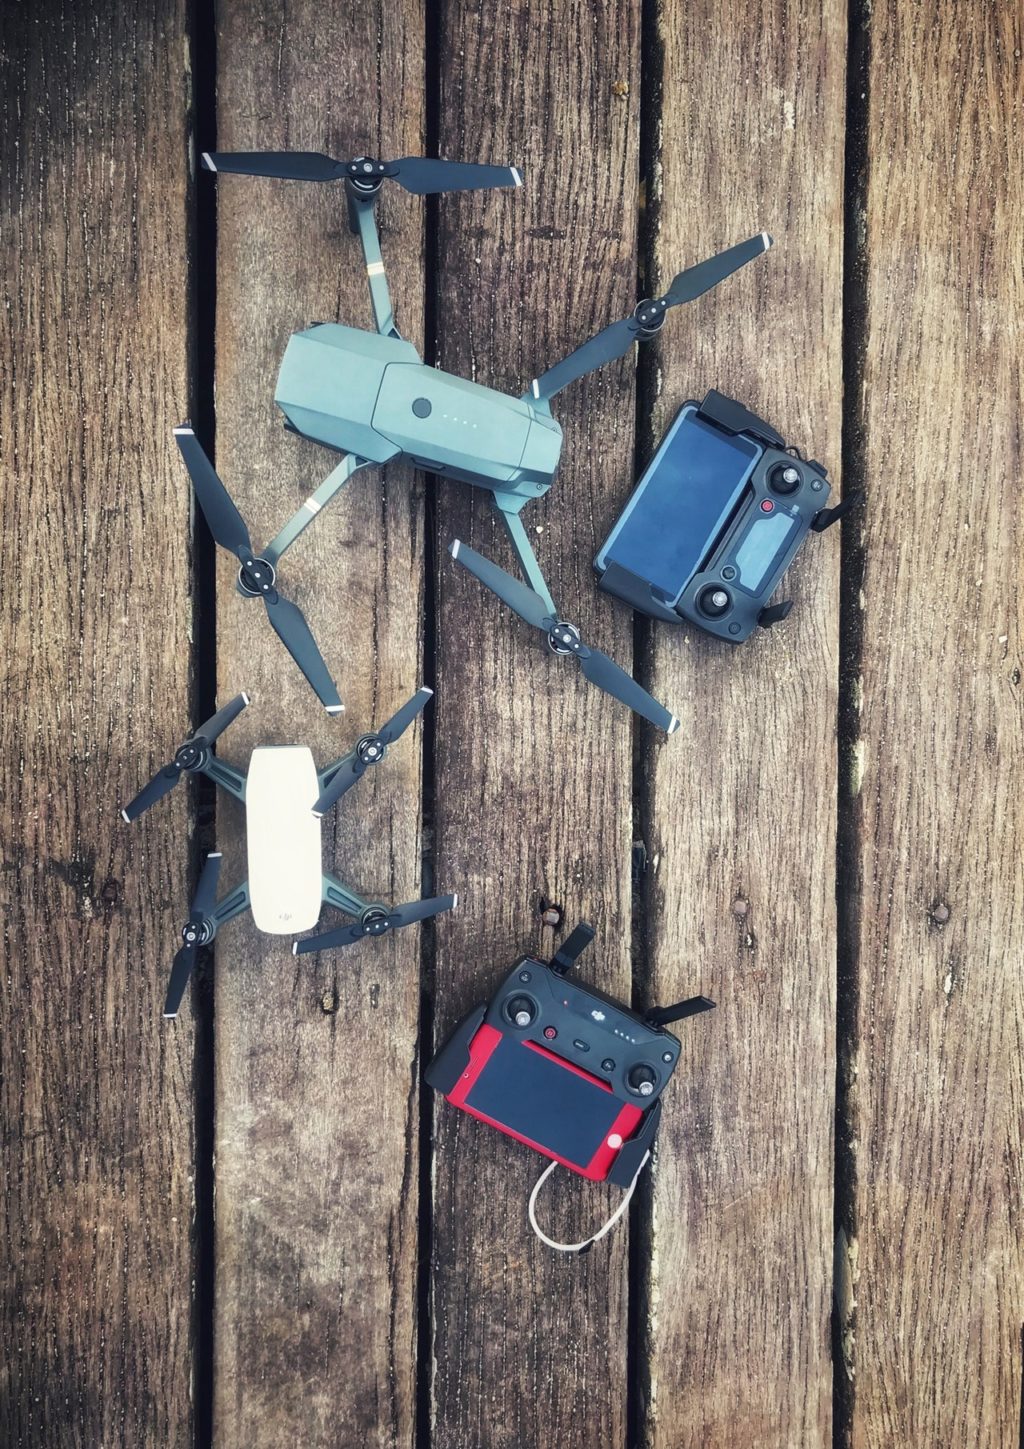 two assorted quadcopter drones with controllers